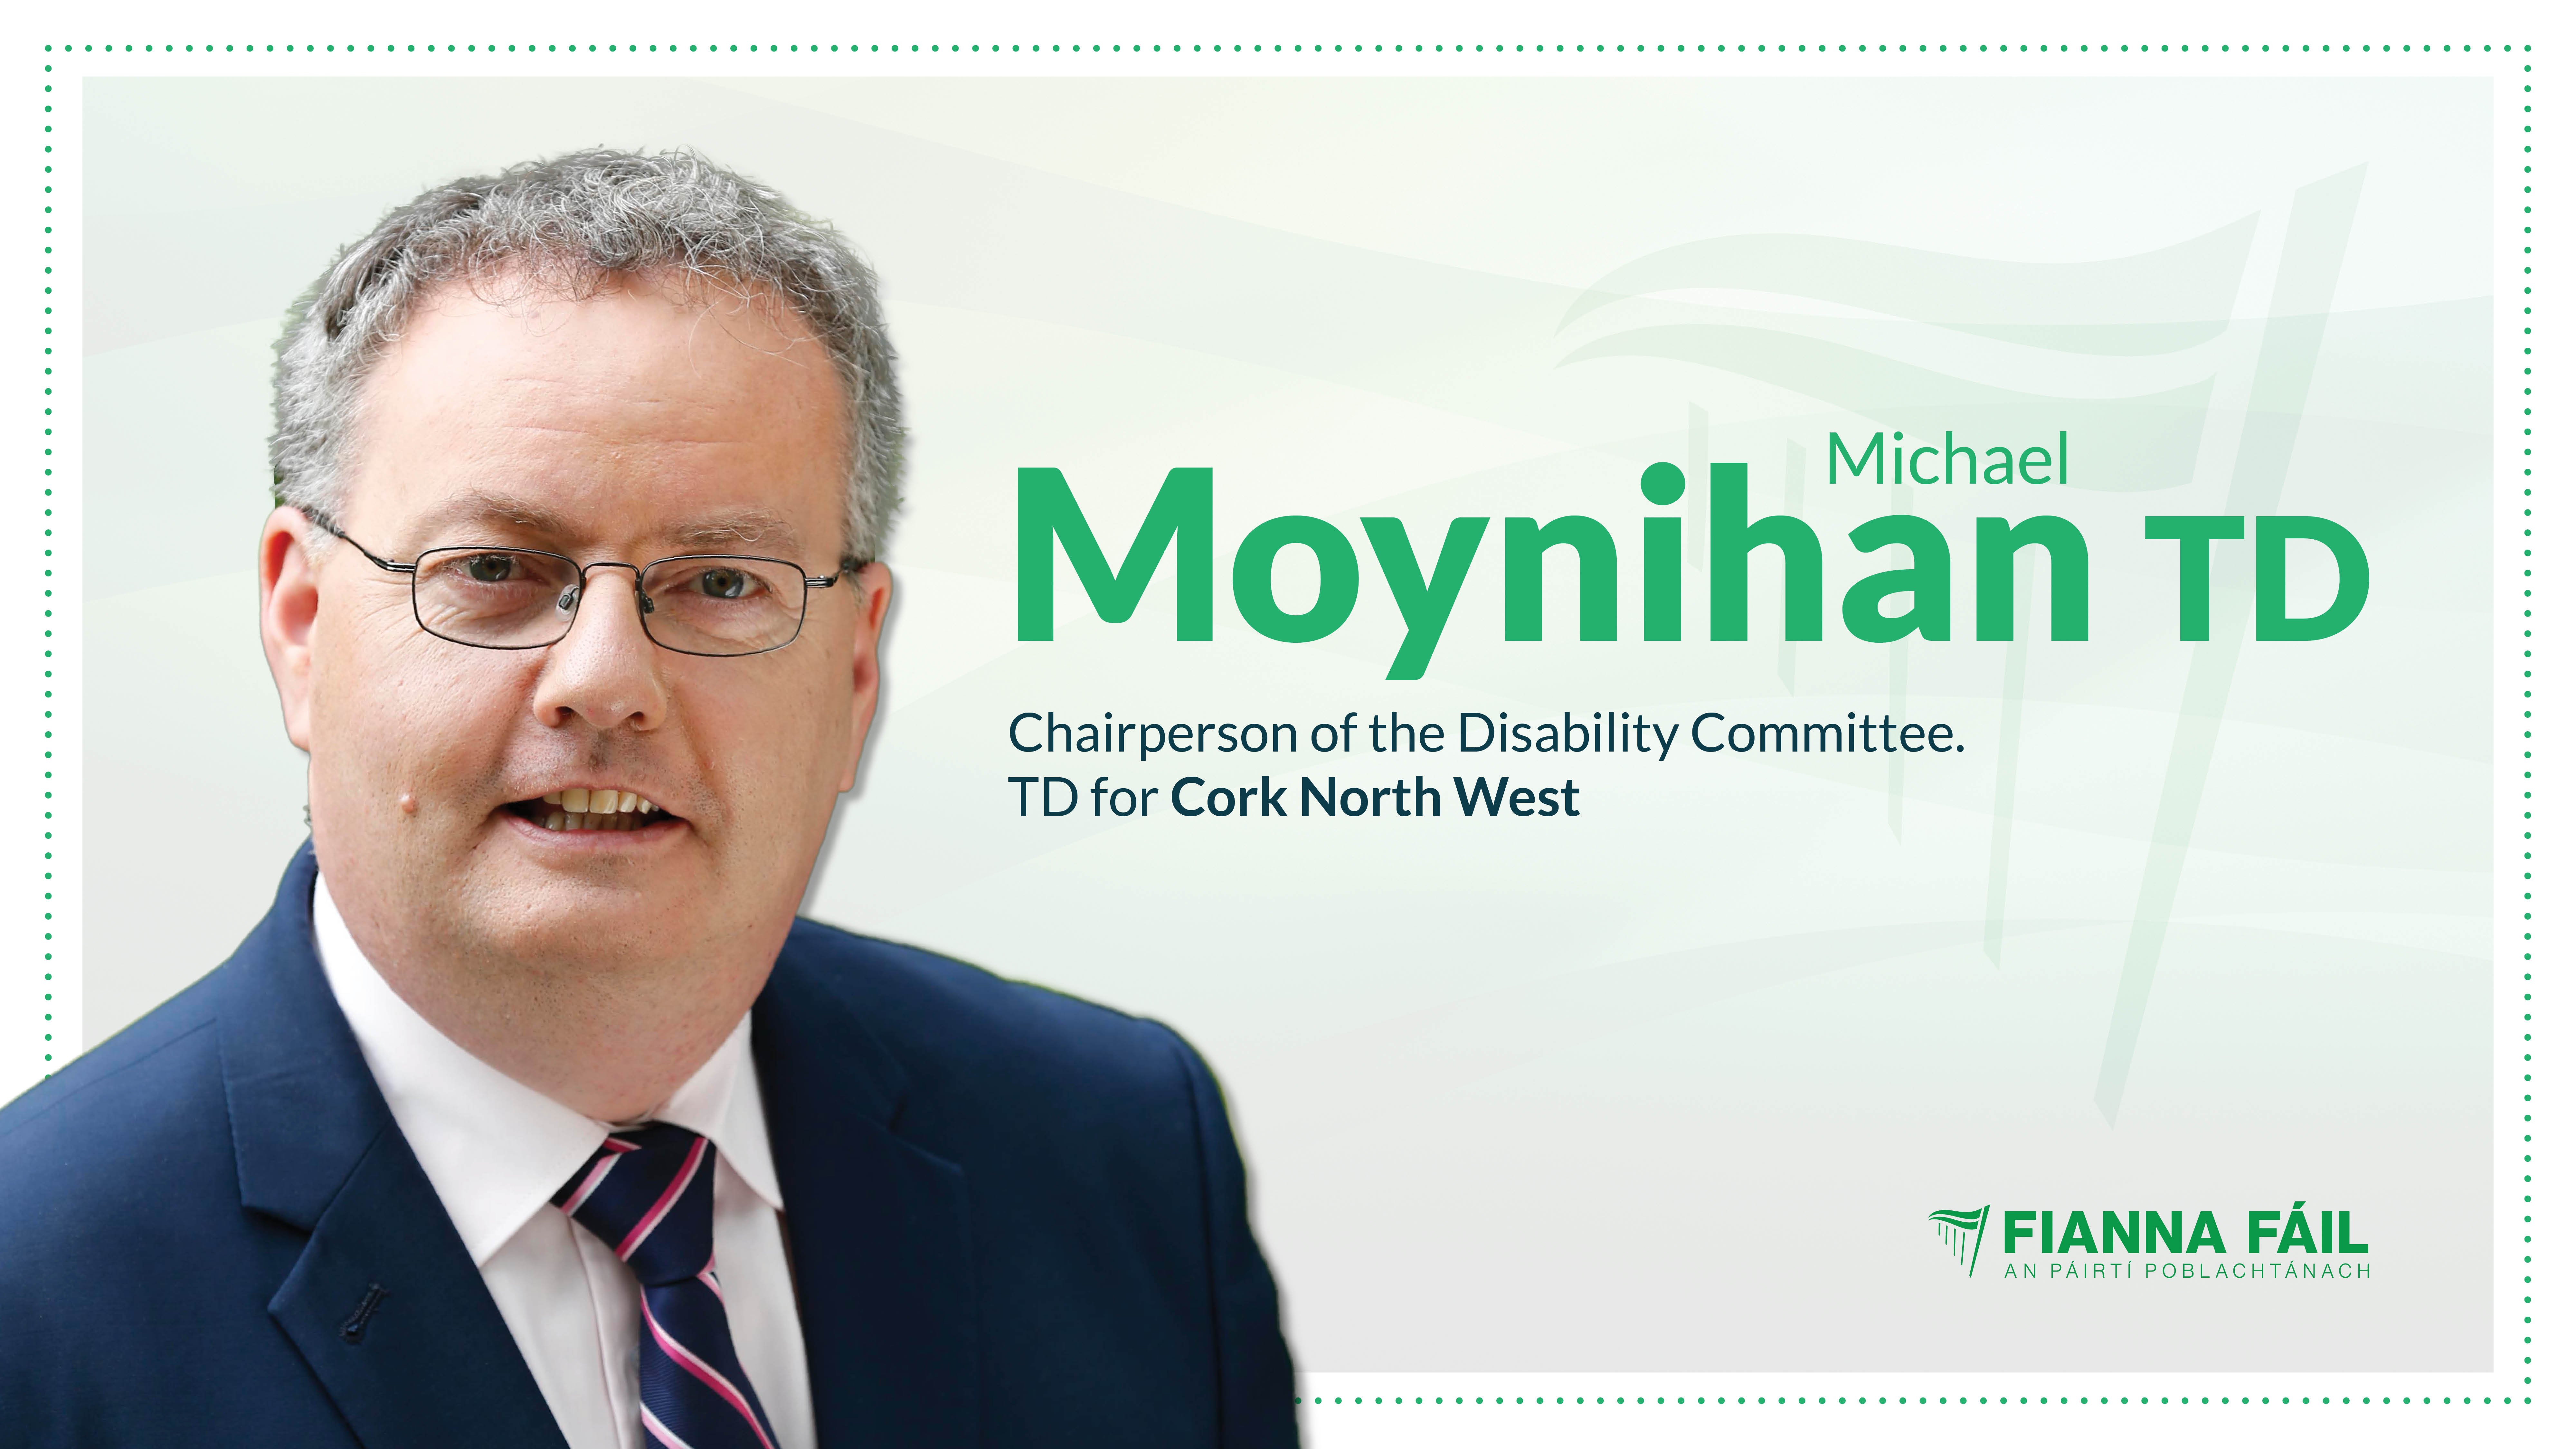 Section 39 carers must be included as part of the Covid recognition payment - Moynihan